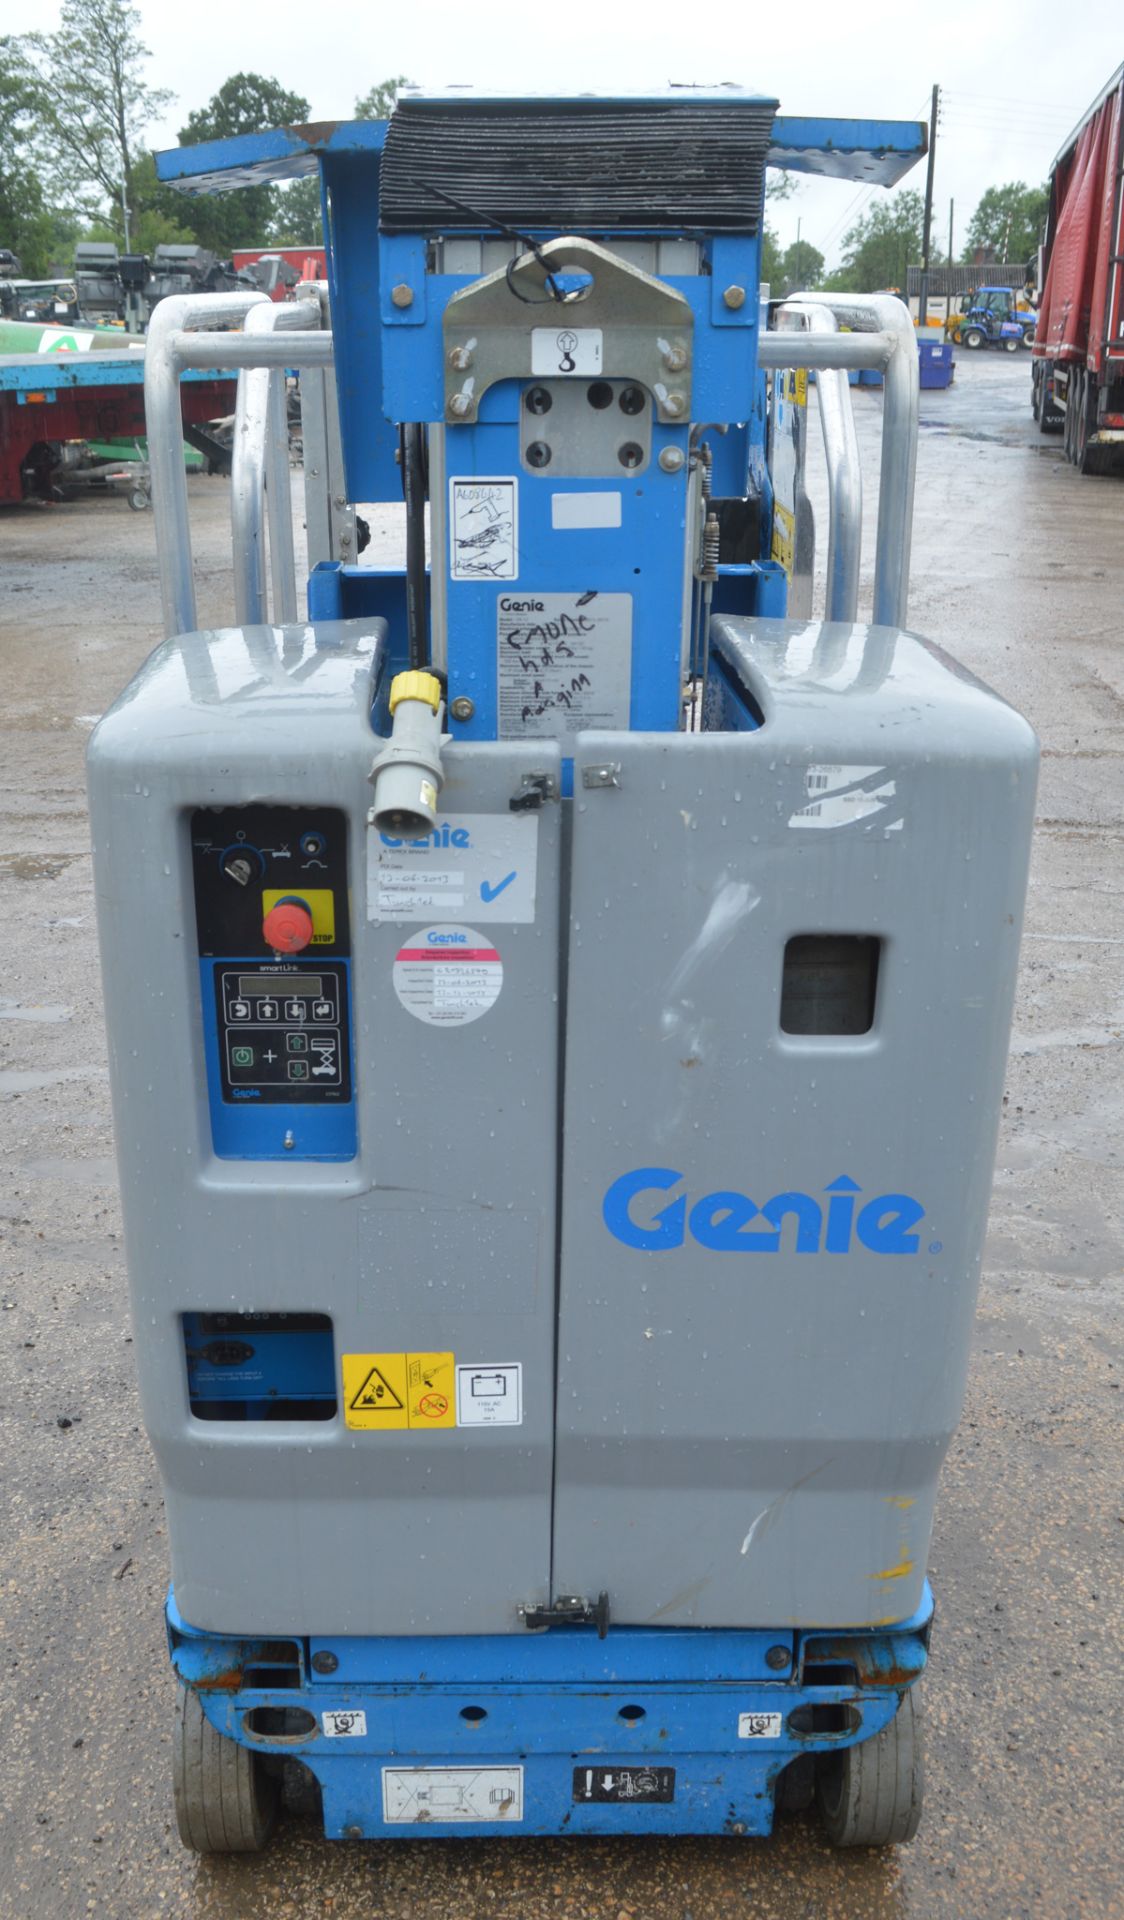 Genie Runabout GR-12 battery electric scissor lift  Year: 2013 S/N: 26579 A608642 - Image 3 of 9